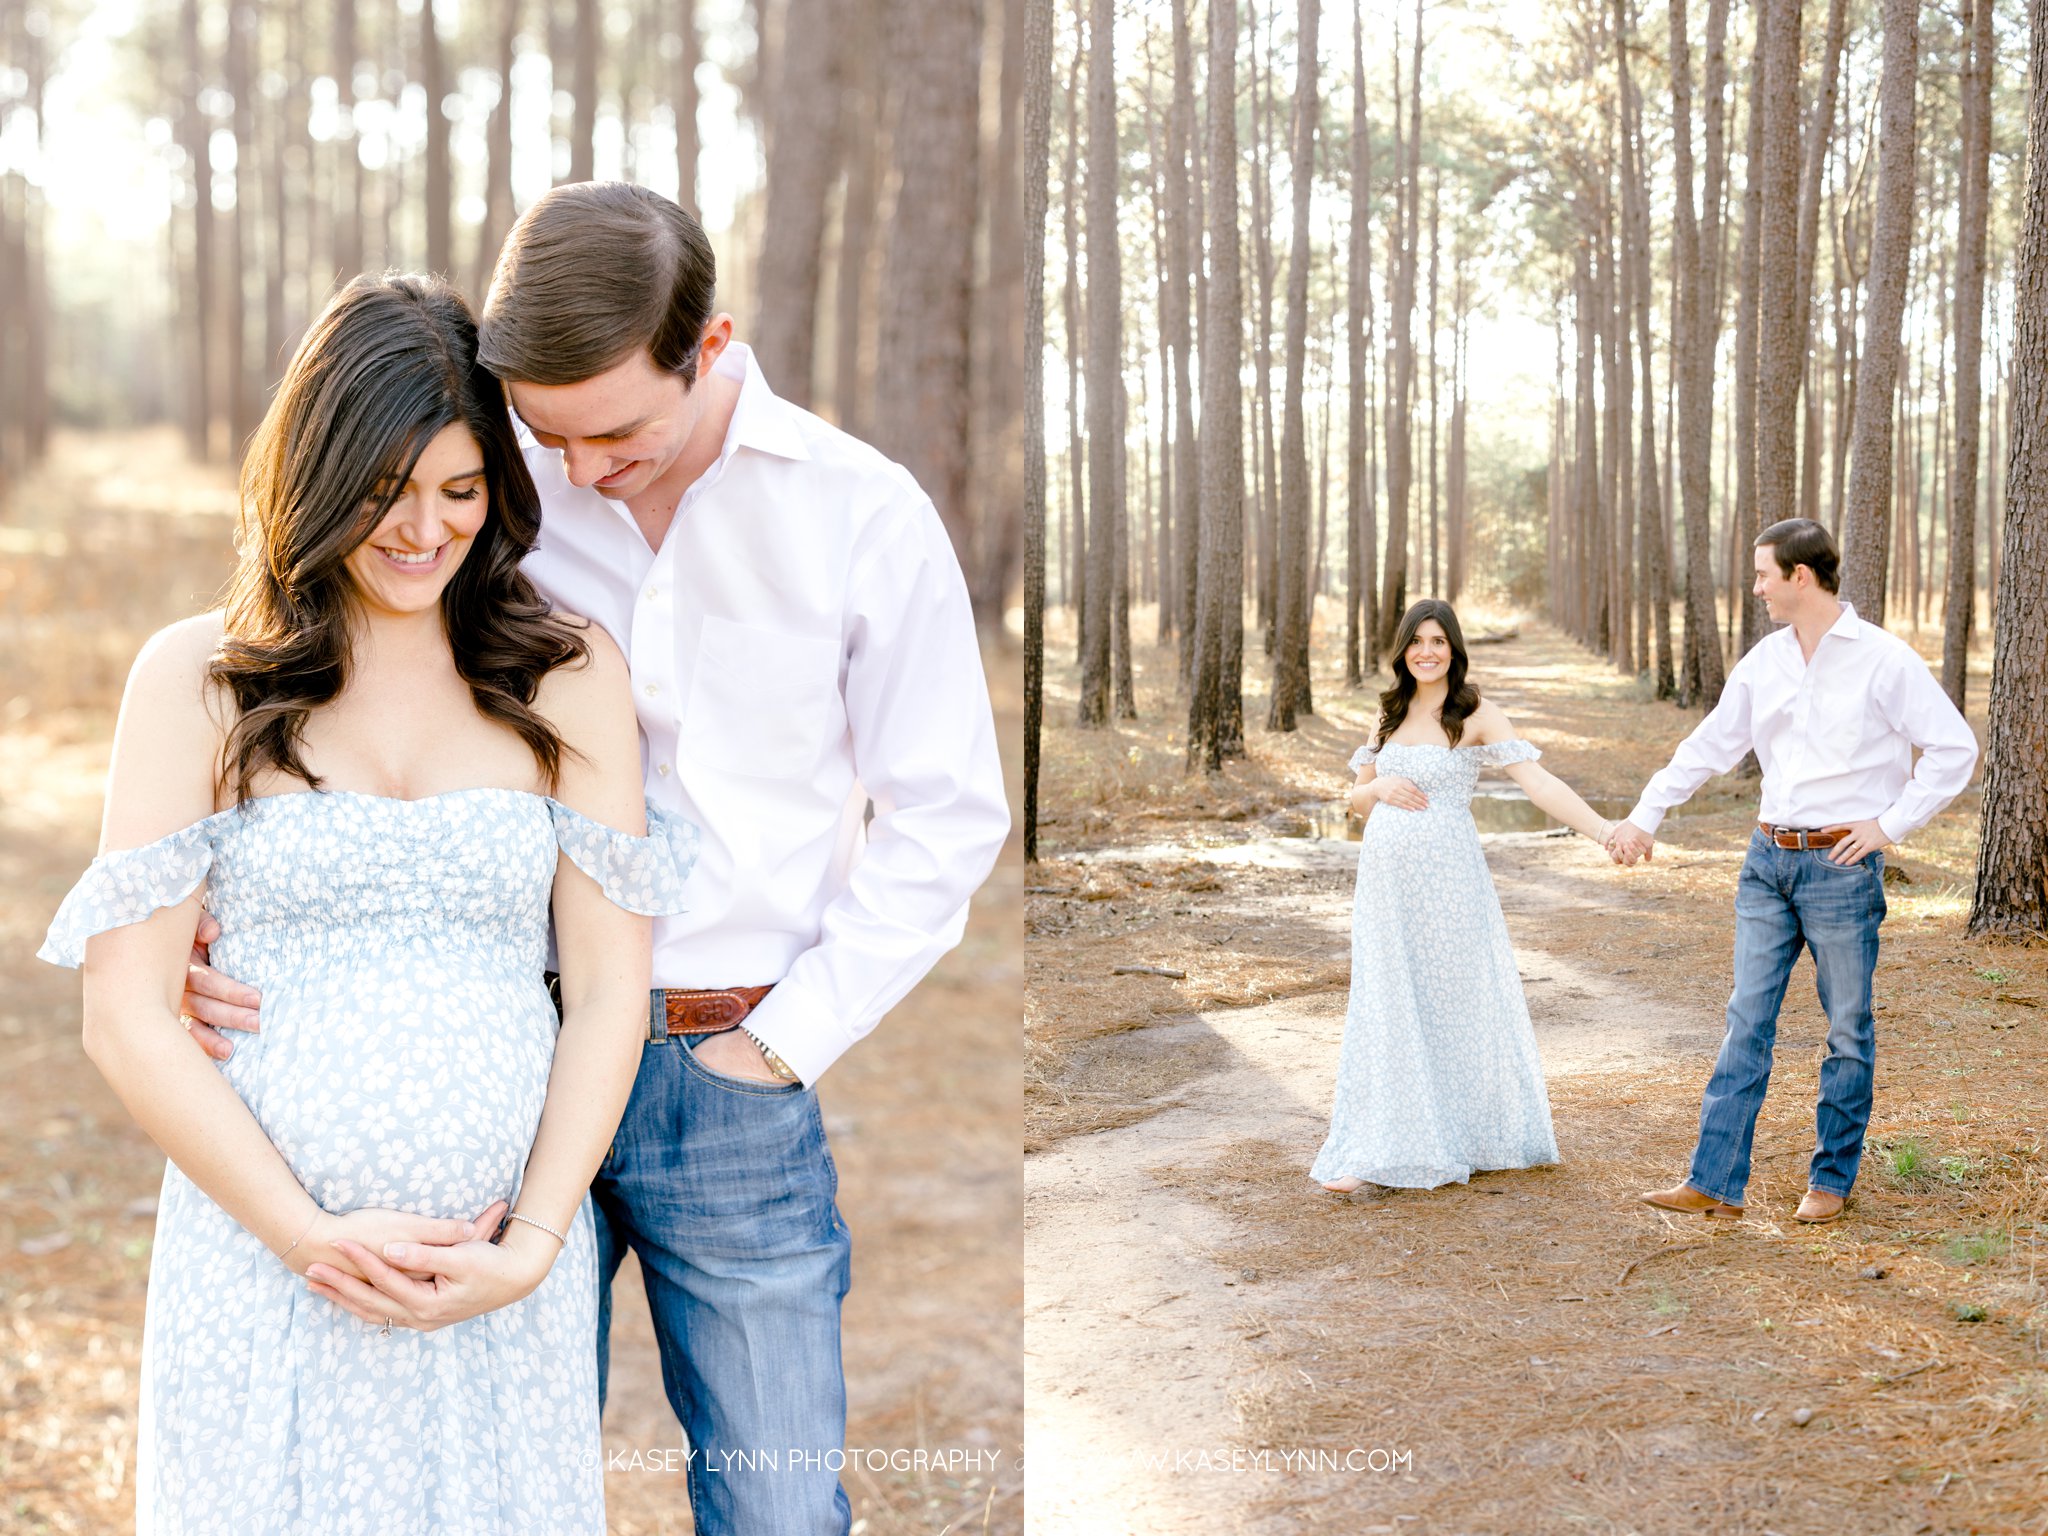 The Woodlands TX Maternity Session / Kasey Lynn Photography